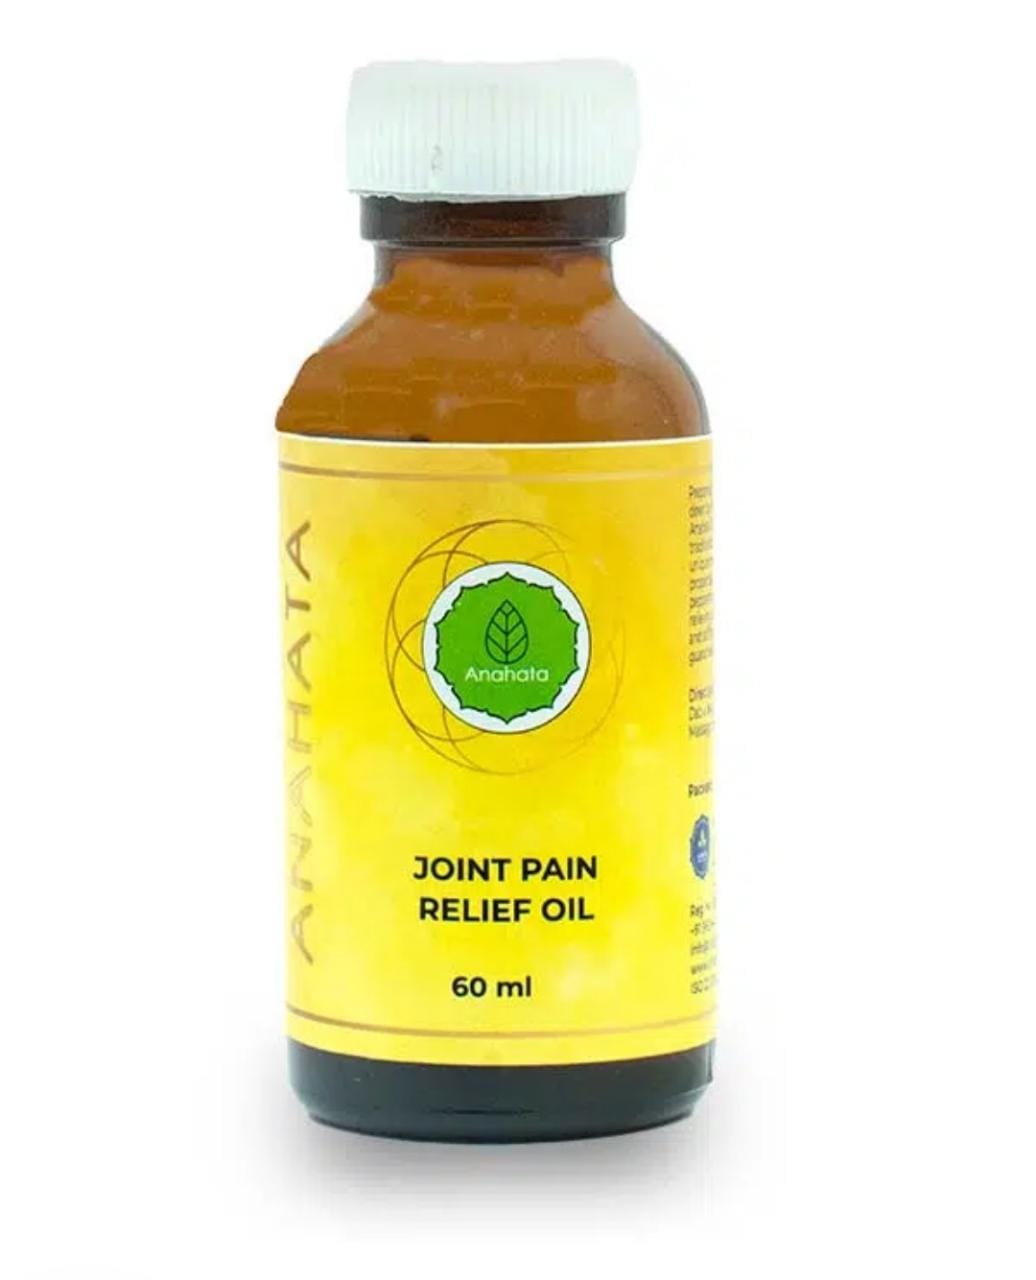 ANAHATA JOINT PAIN RELIEF OIL